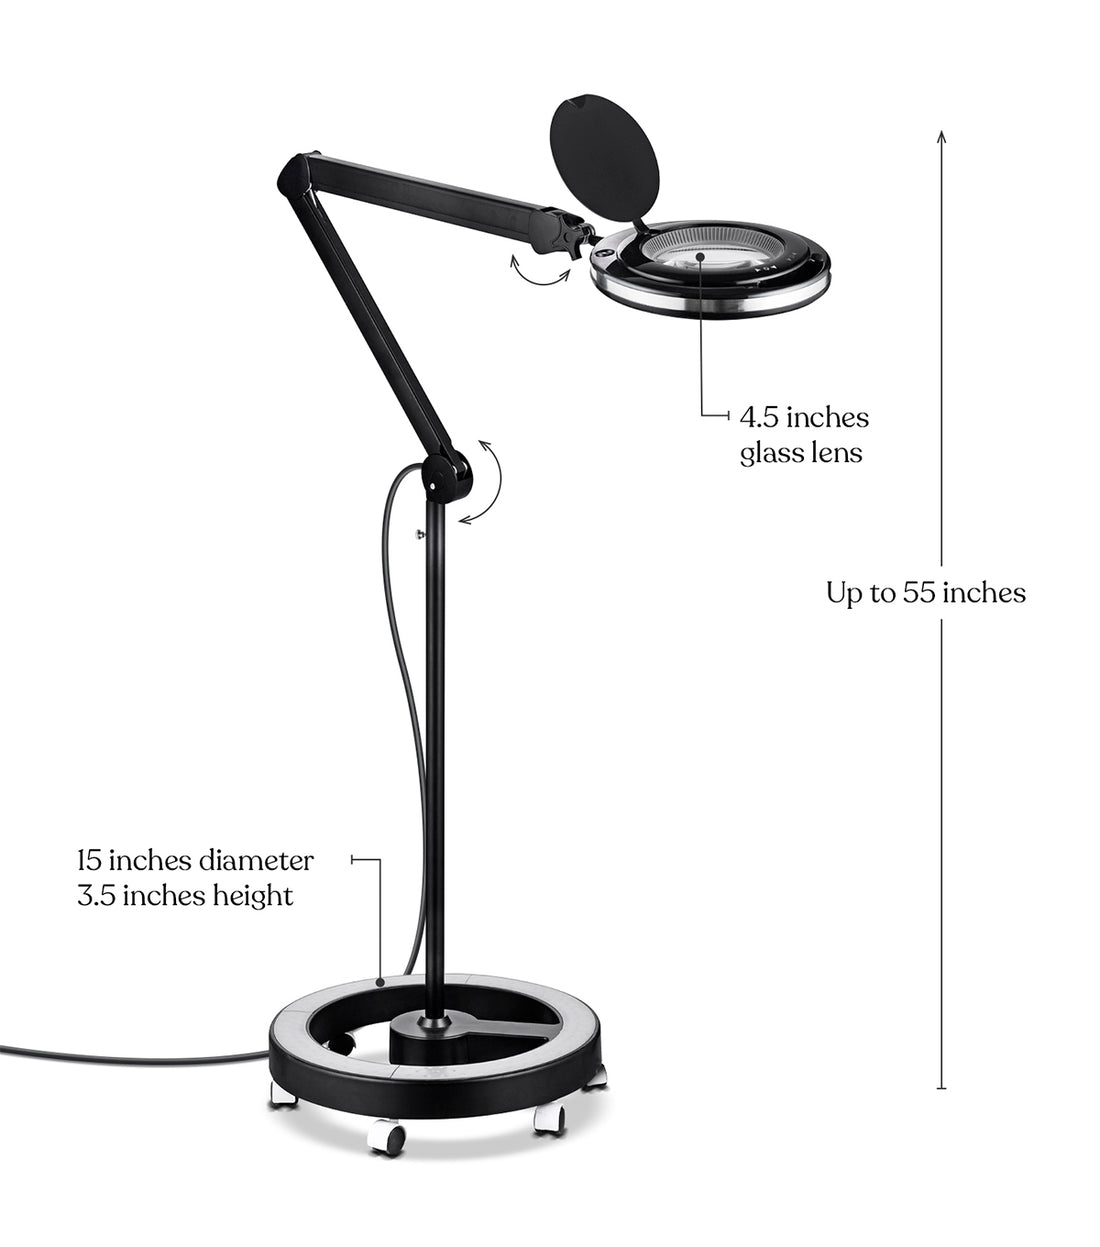 Brightech LightView LED 2-in-1 Floor and Table Lamp - White